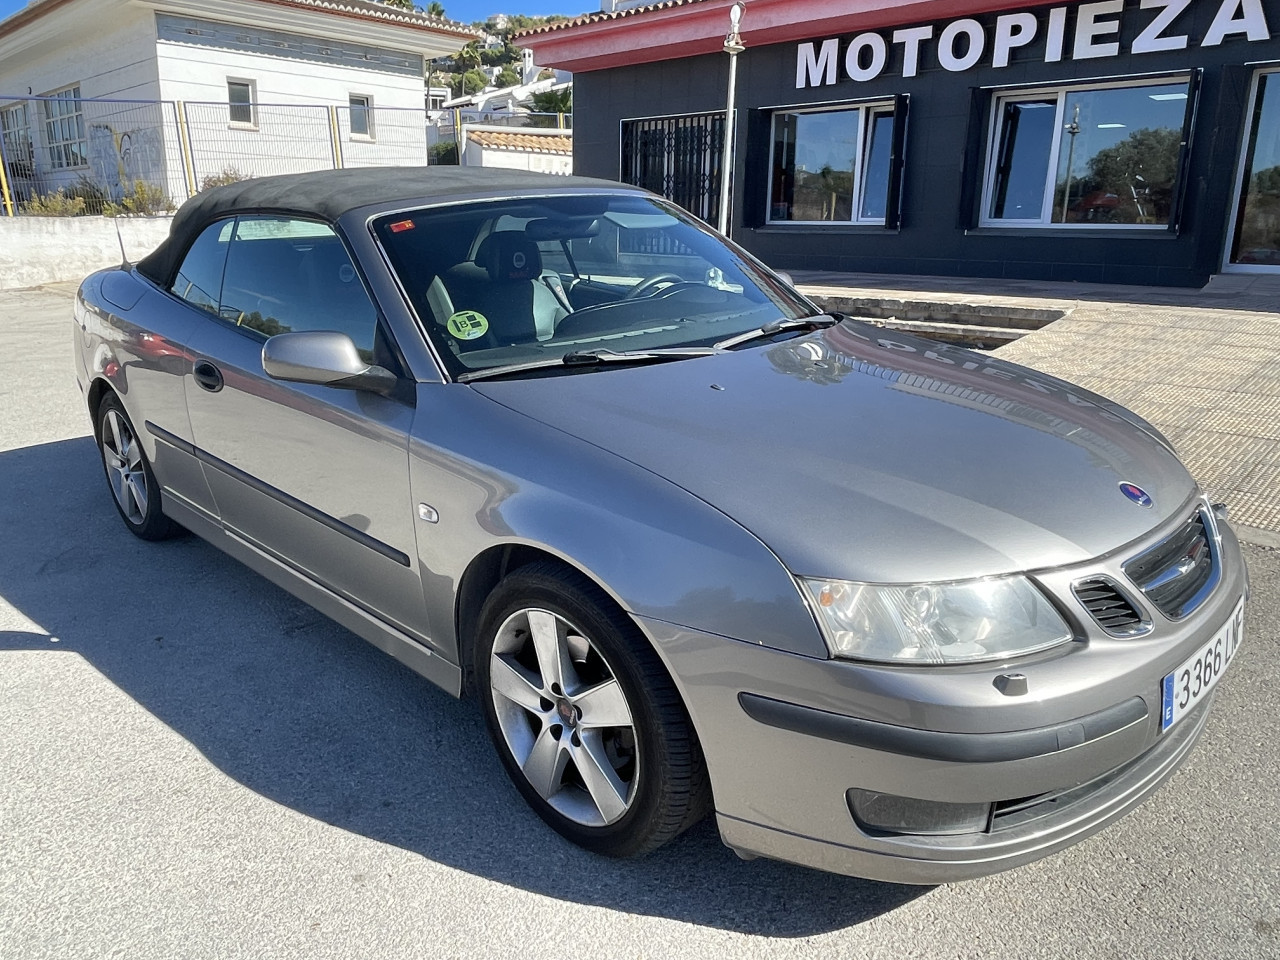 Saab 9-3 2.0D Automatic Cabriolet Photo